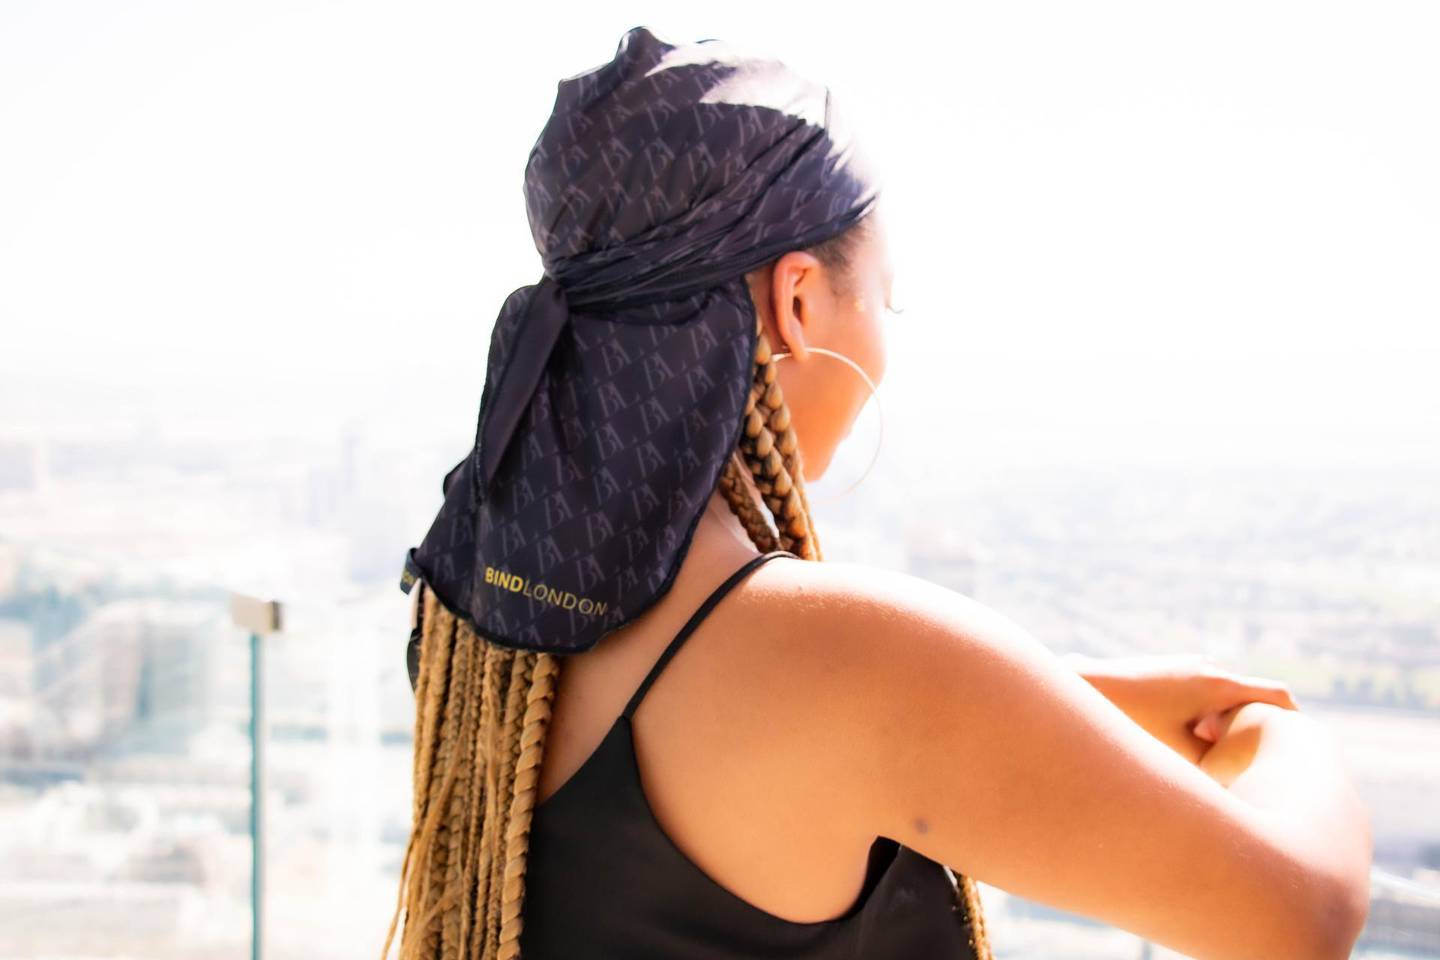 Kayleigh Benoit created sweat-wicking headbands, wraps and hijabs so women can exercise without having to worry about frizzing. Courtesy Bind London